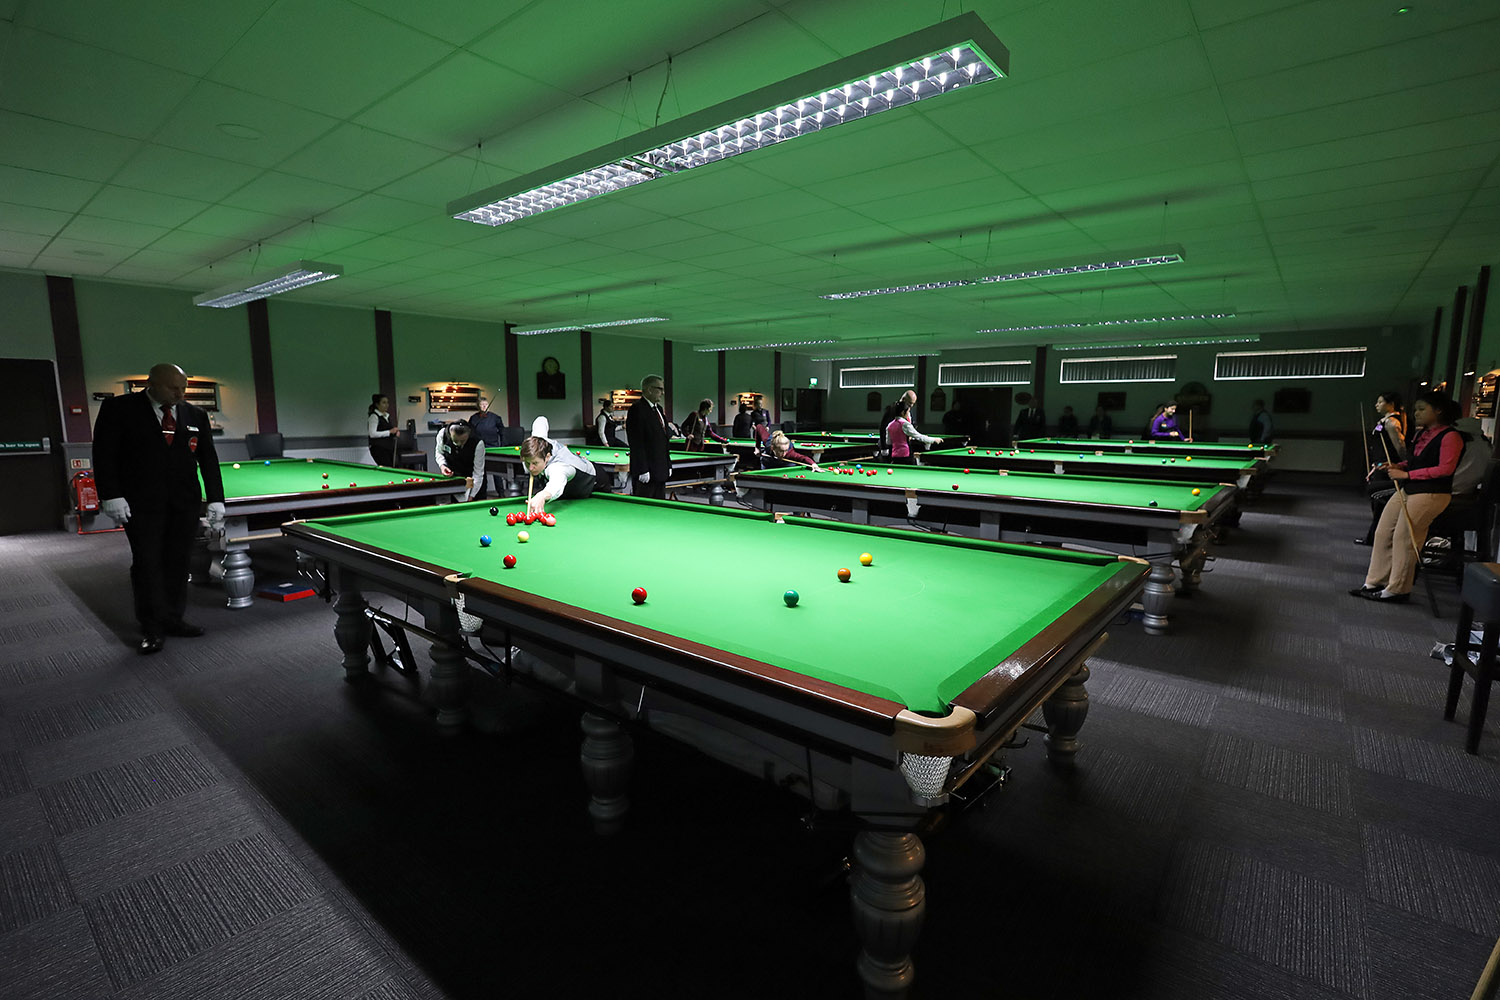 Landywood Snooker Club at the British Open